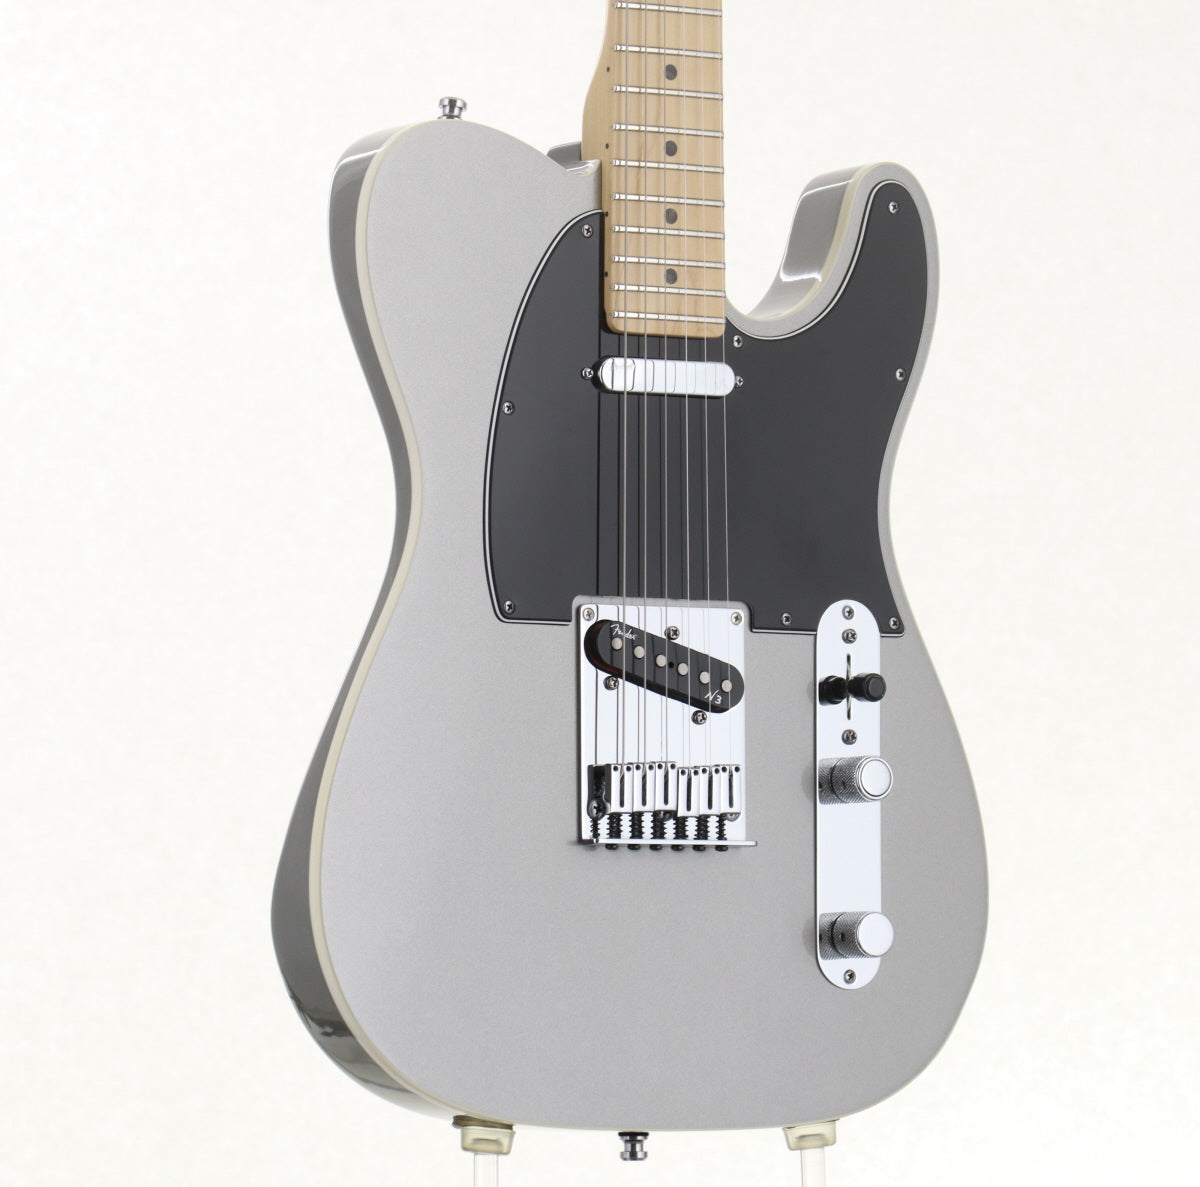 Fender USA / American Deluxe Telecaster アメデラ テレキャス - 楽器、器材